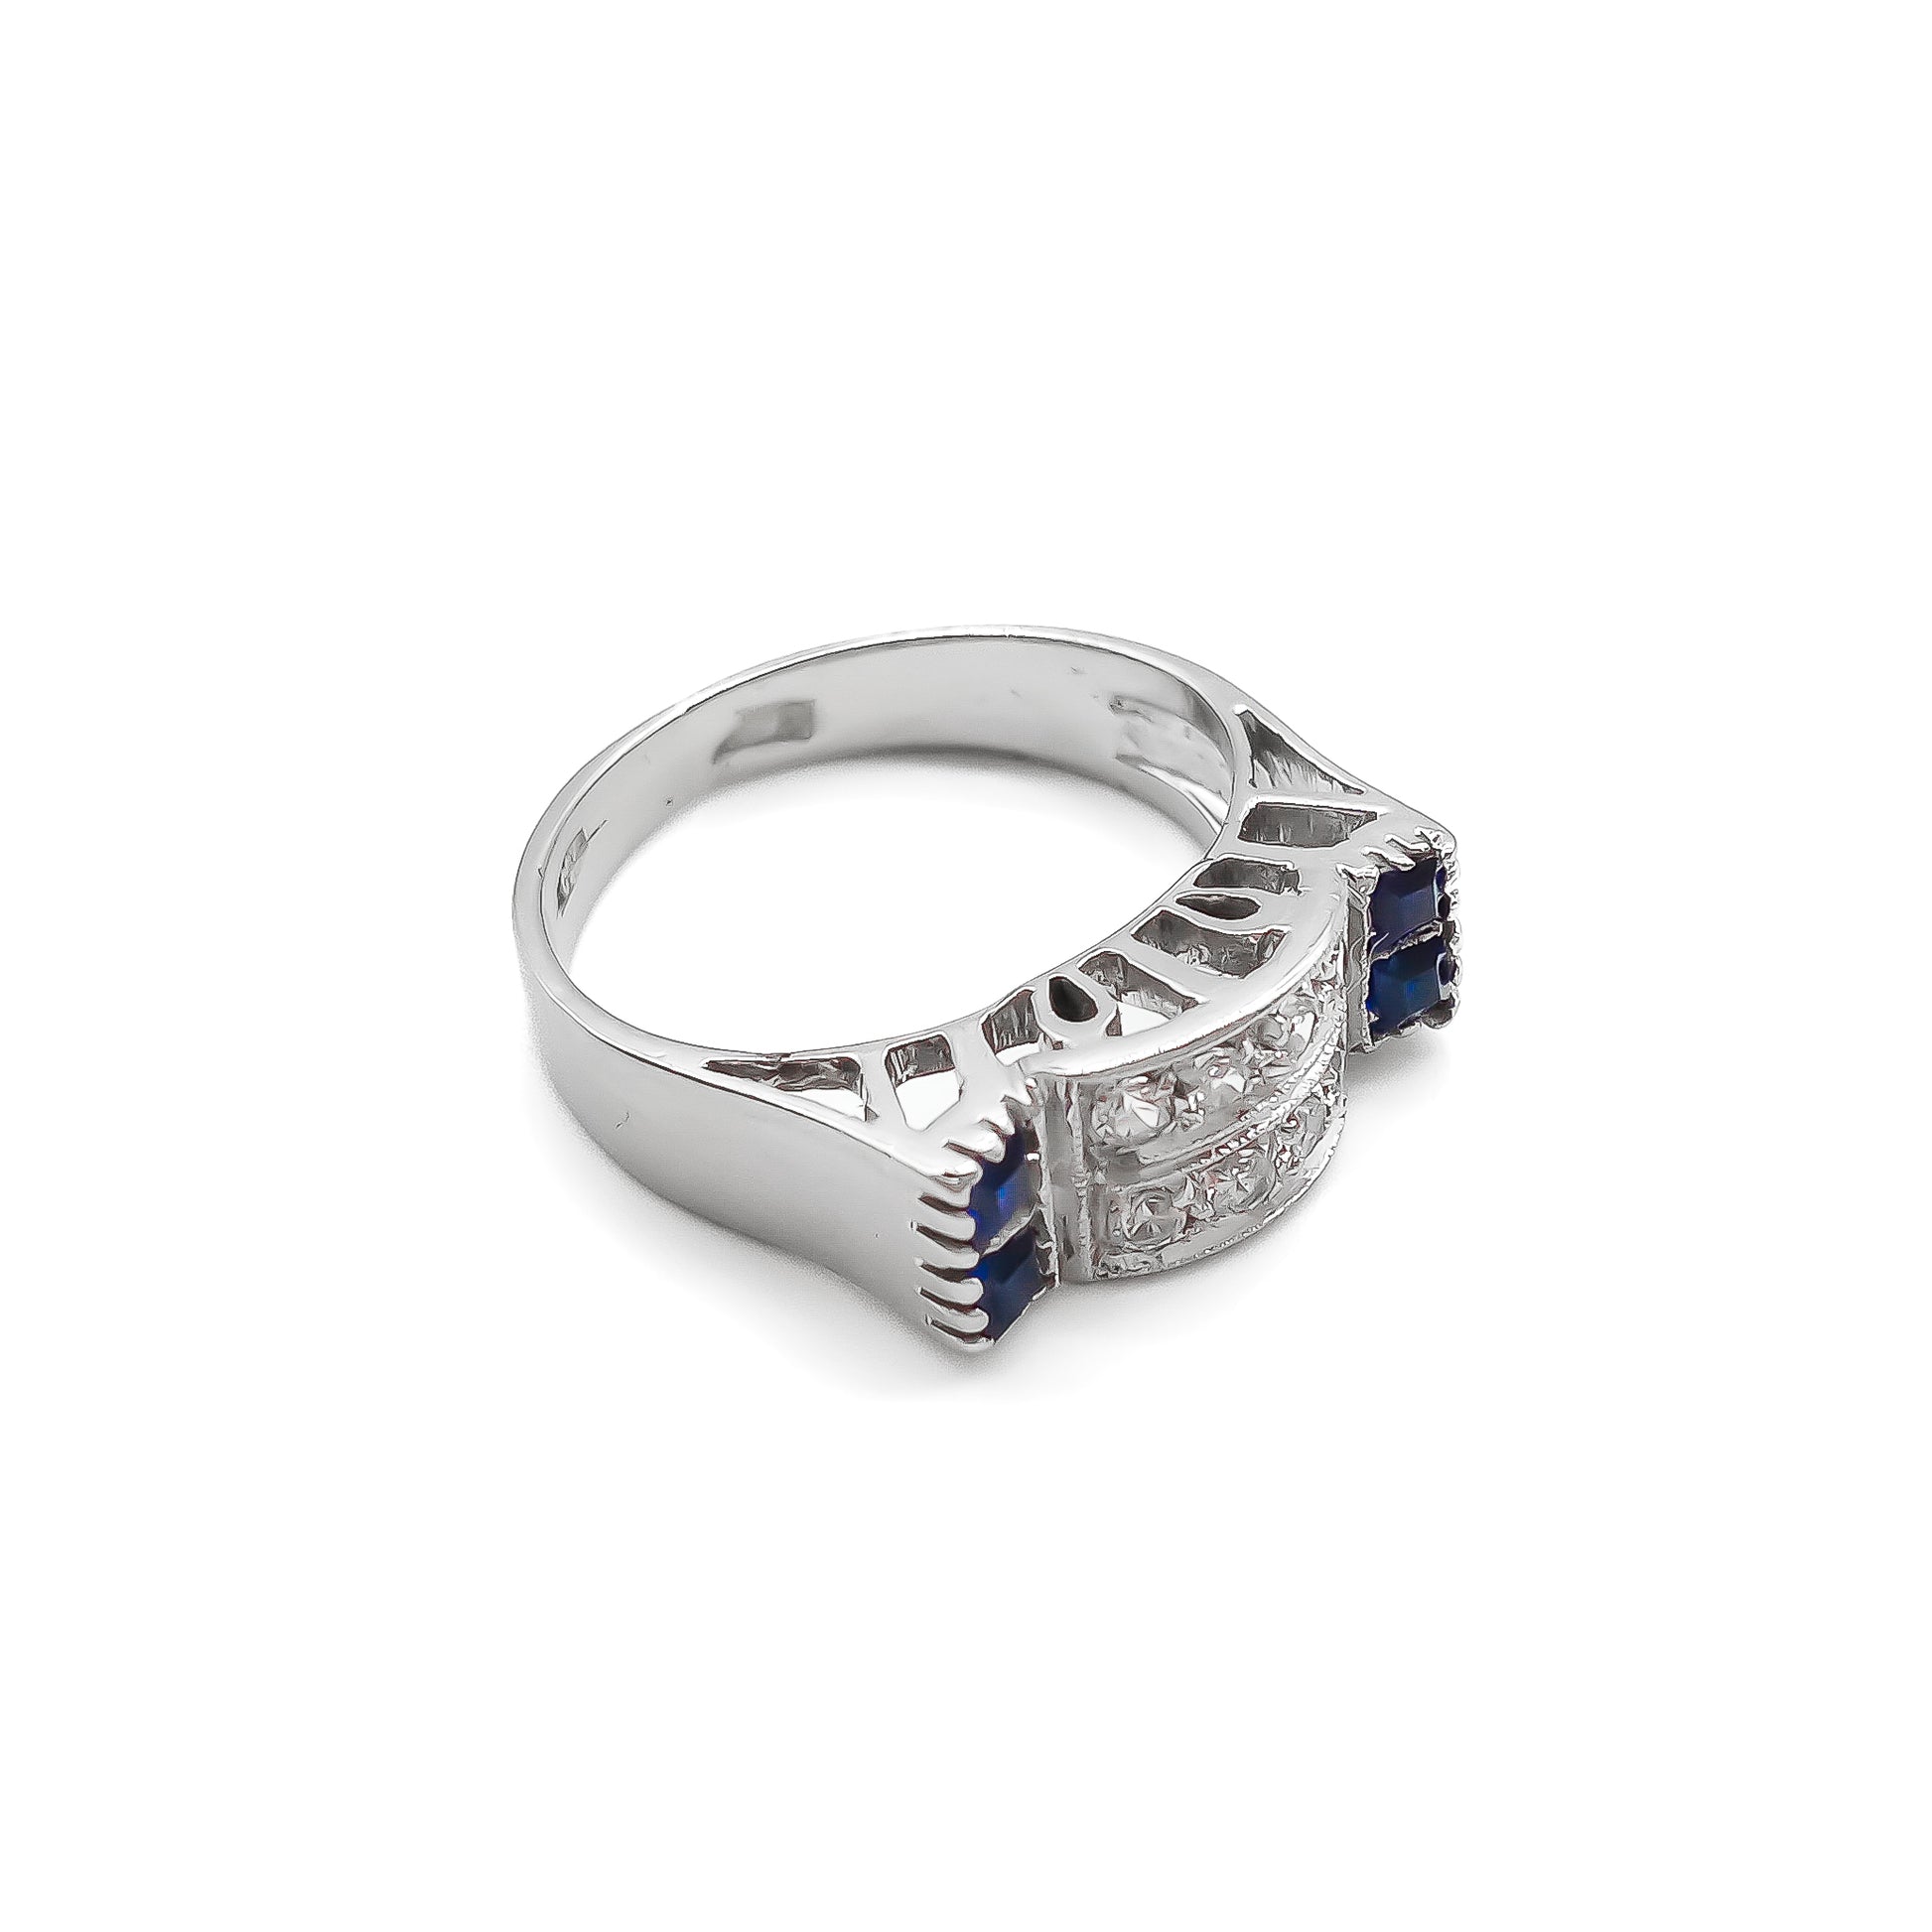 Stylish 18ct white gold ring set with four rectangular sapphires and eight round diamonds.